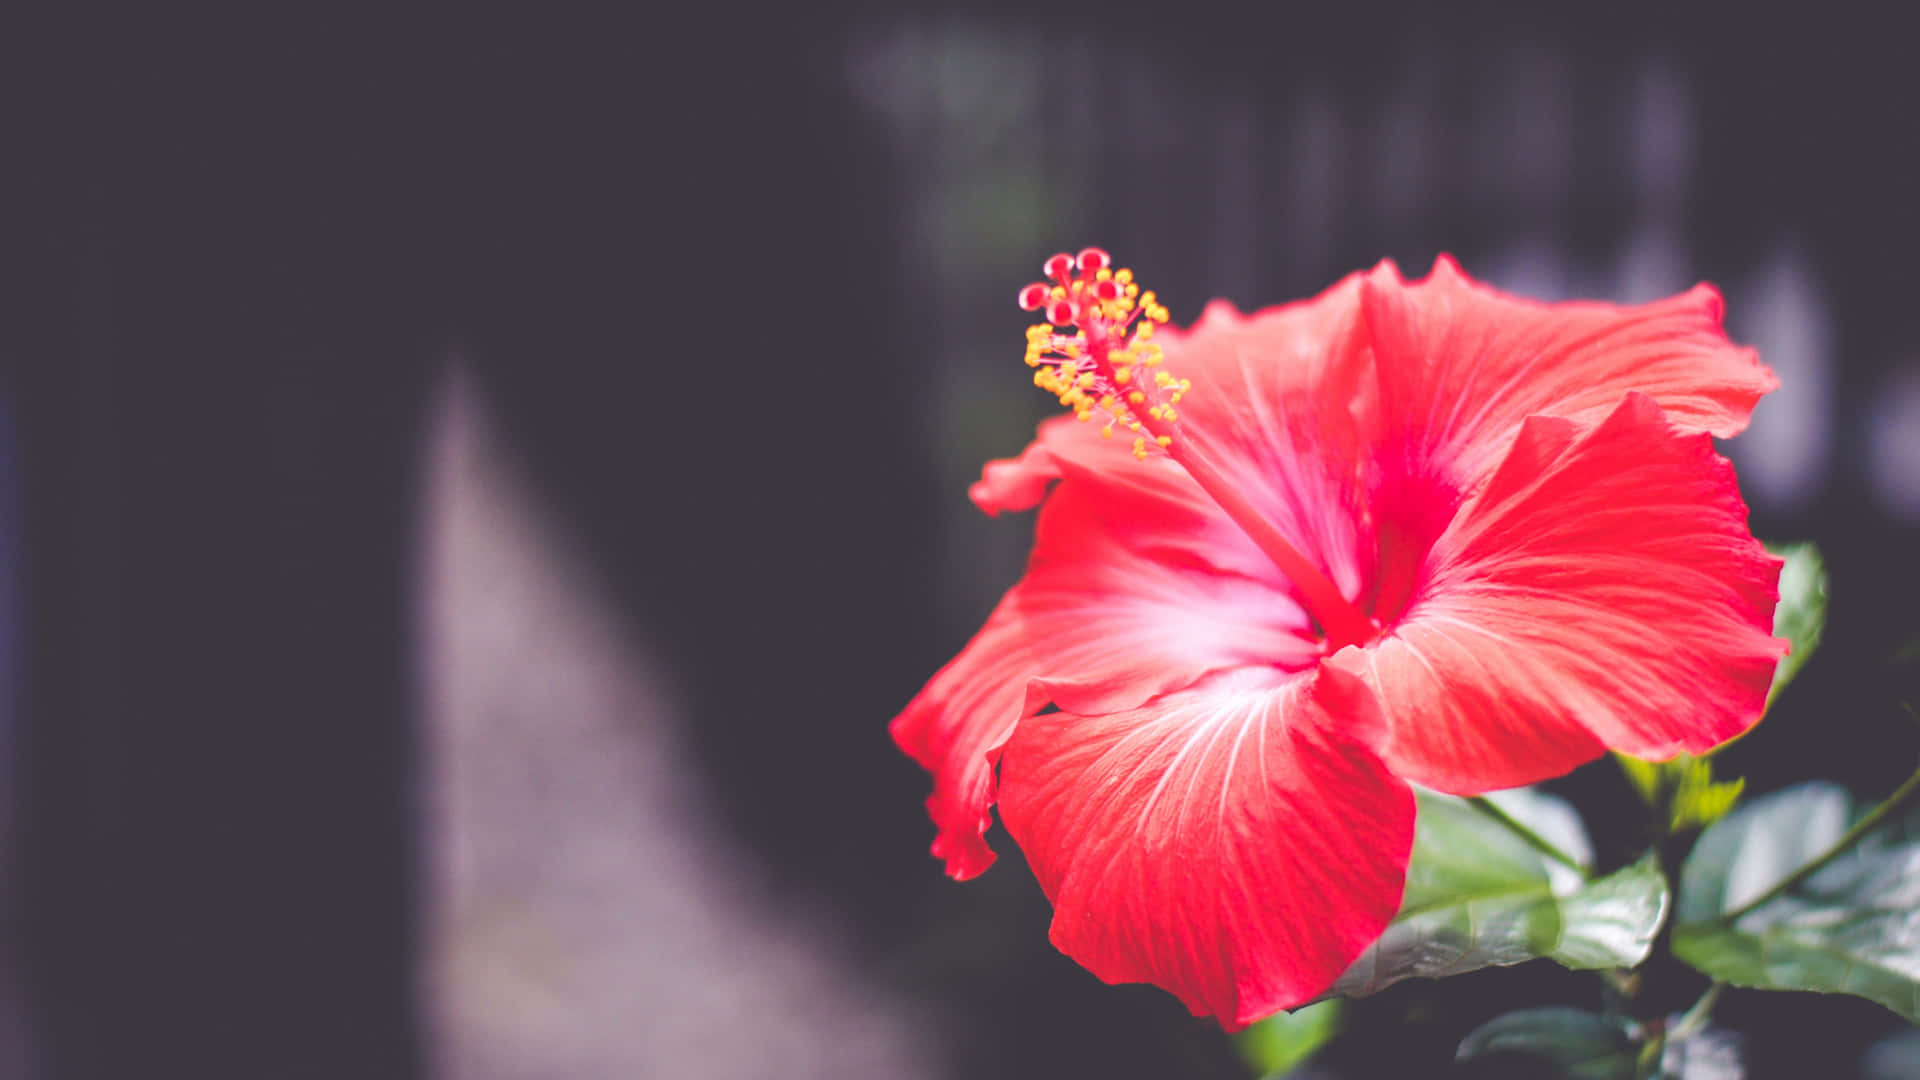 Caption: Stunning Bright Red Hibiscus Blossom In Full Bloom Wallpaper